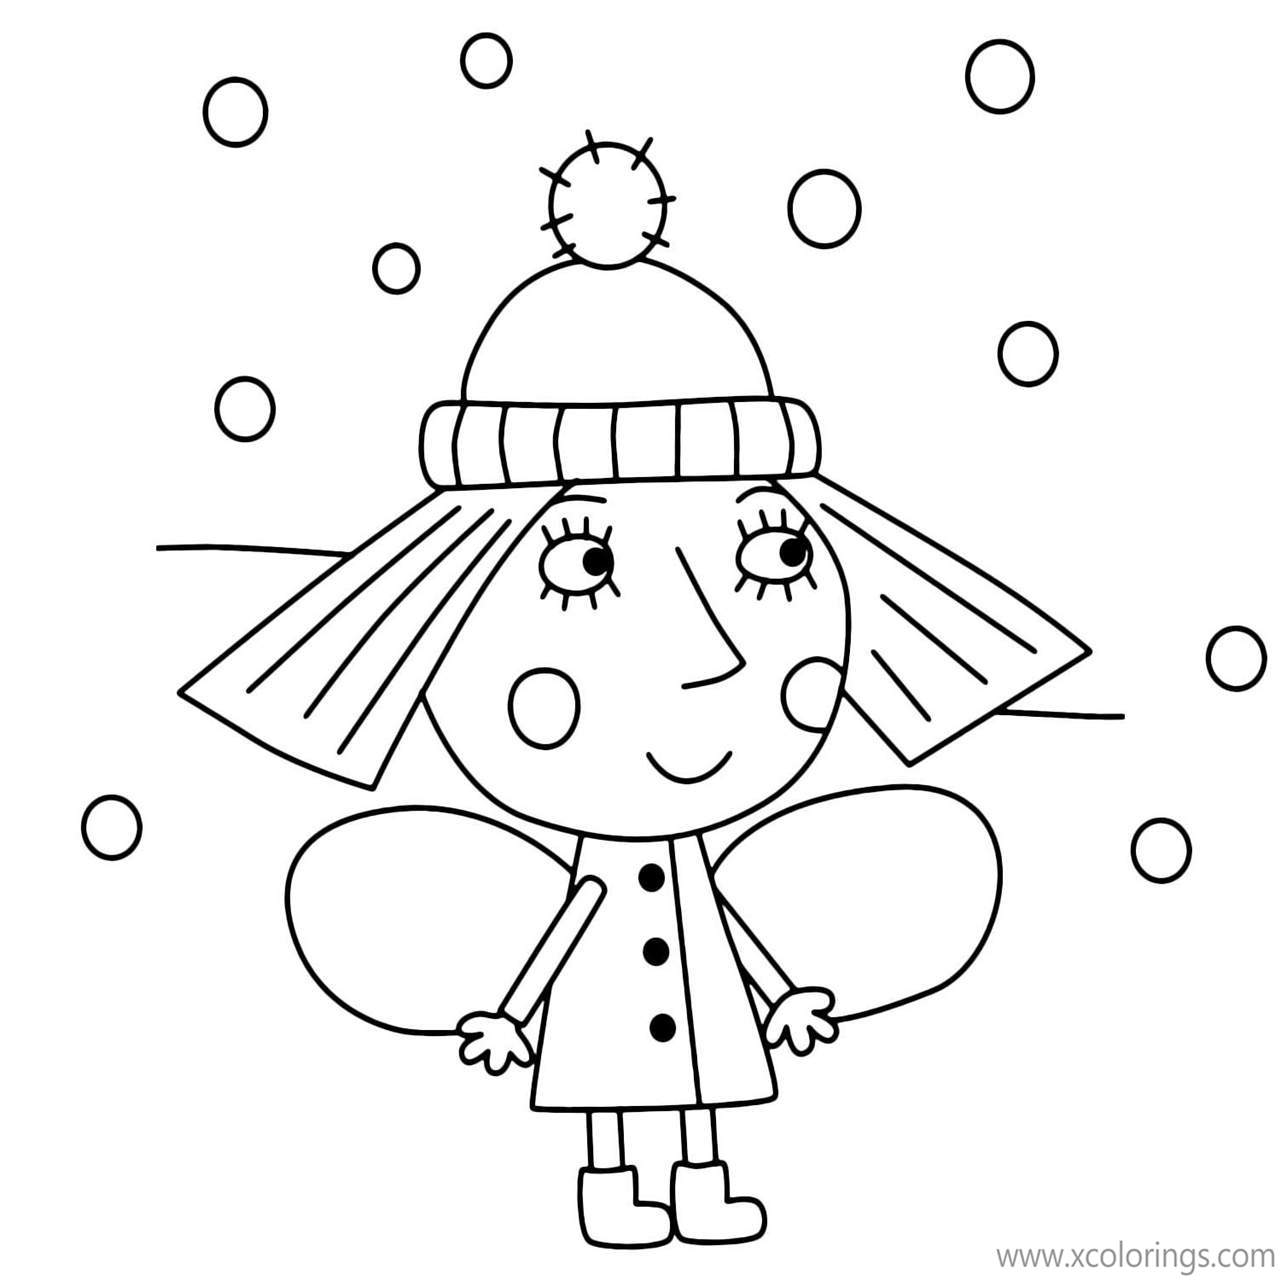 Free Ben And Holly Coloring Pages Princess with Wings printable